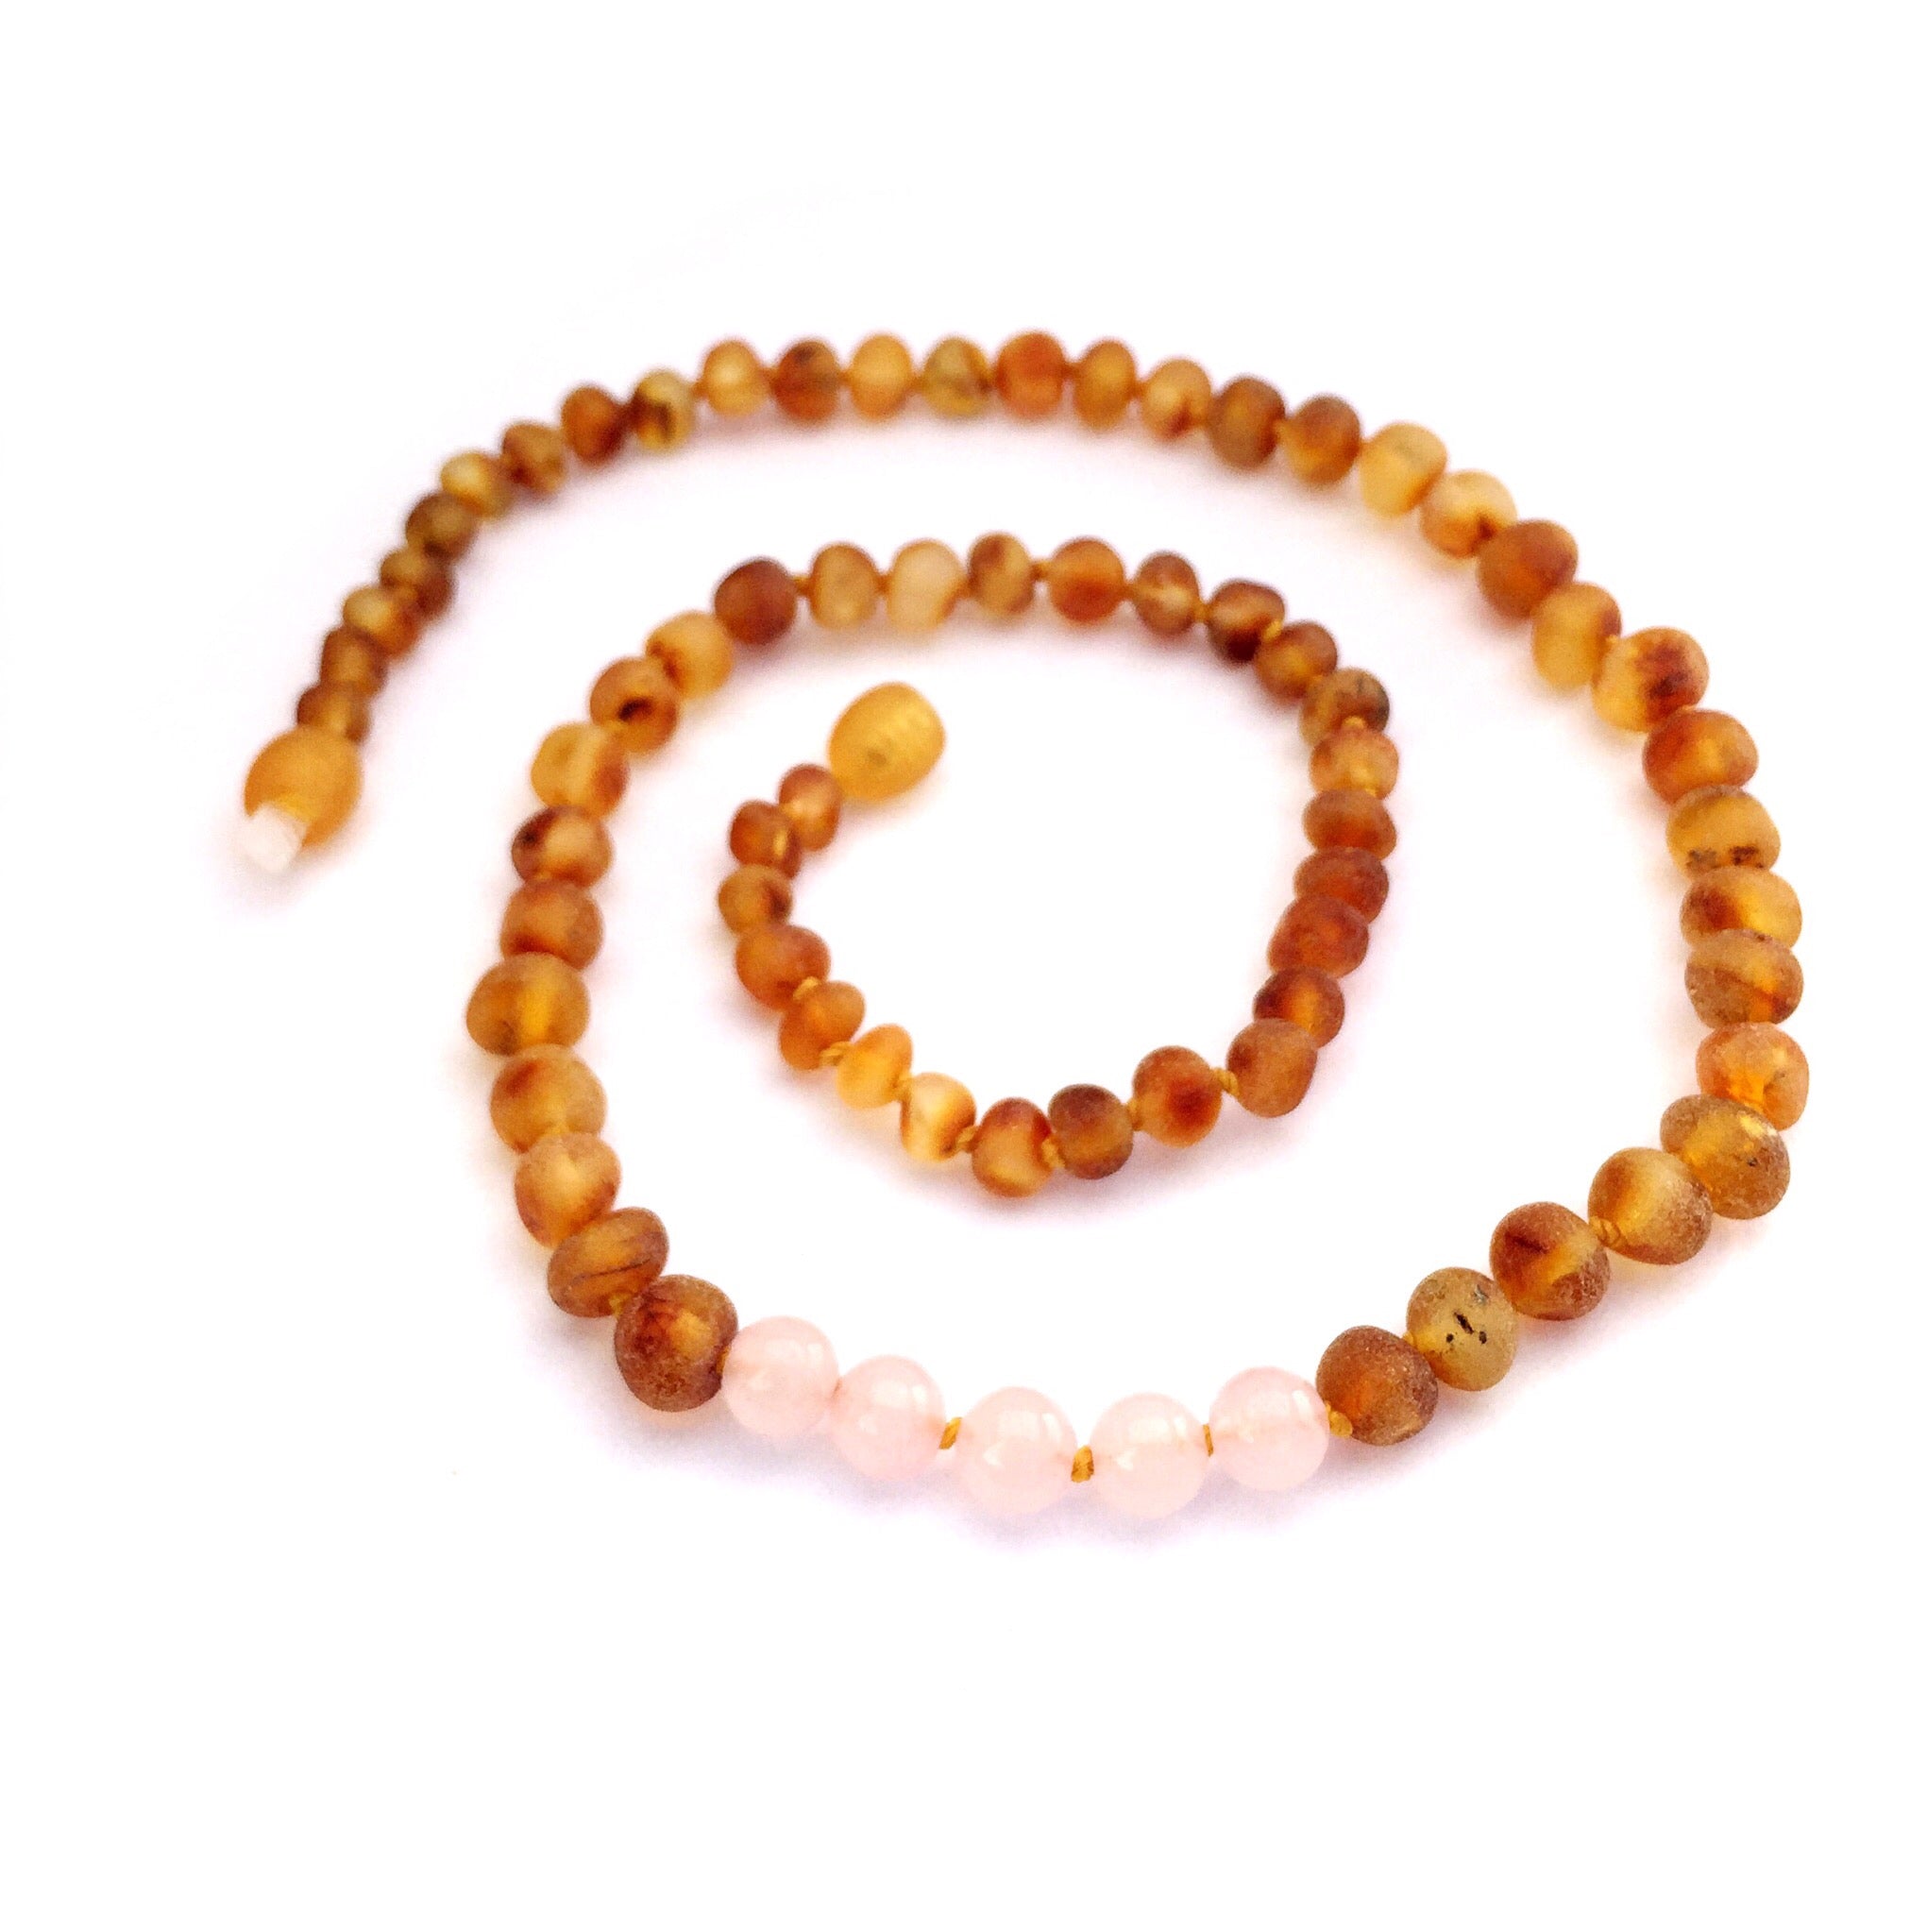 Amber and Rose Quartz Necklace - Crunch Natural Parenting is where to buy